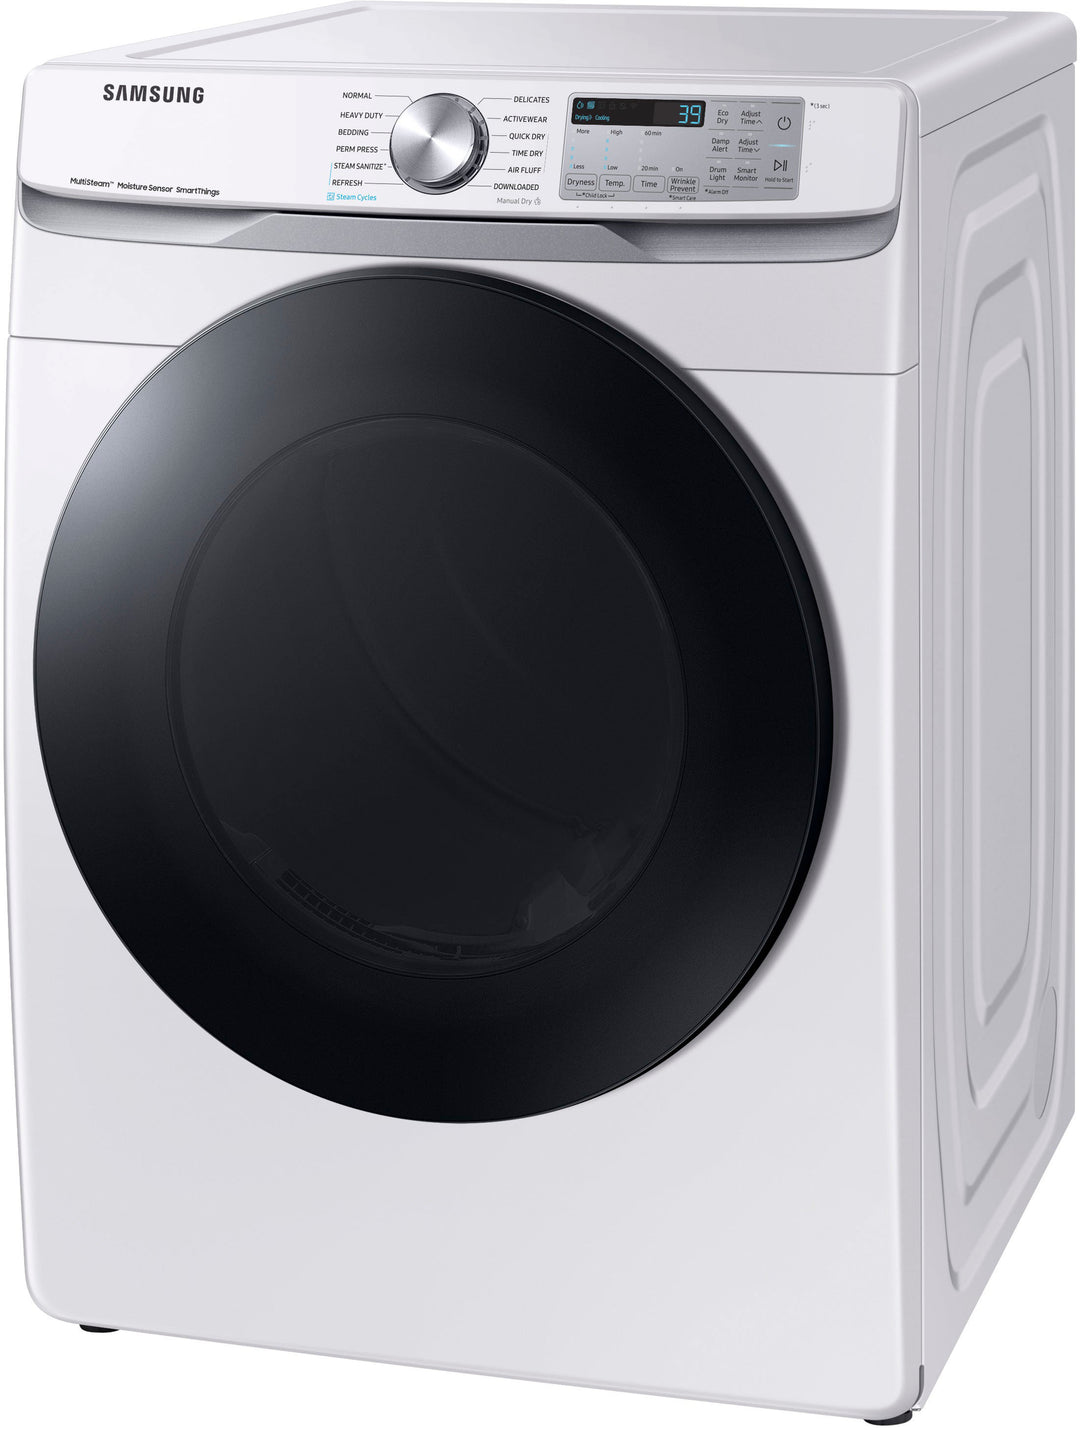 Samsung - 7.5 cu. ft. Smart Electric Dryer with Steam Sanitize+ - White_9